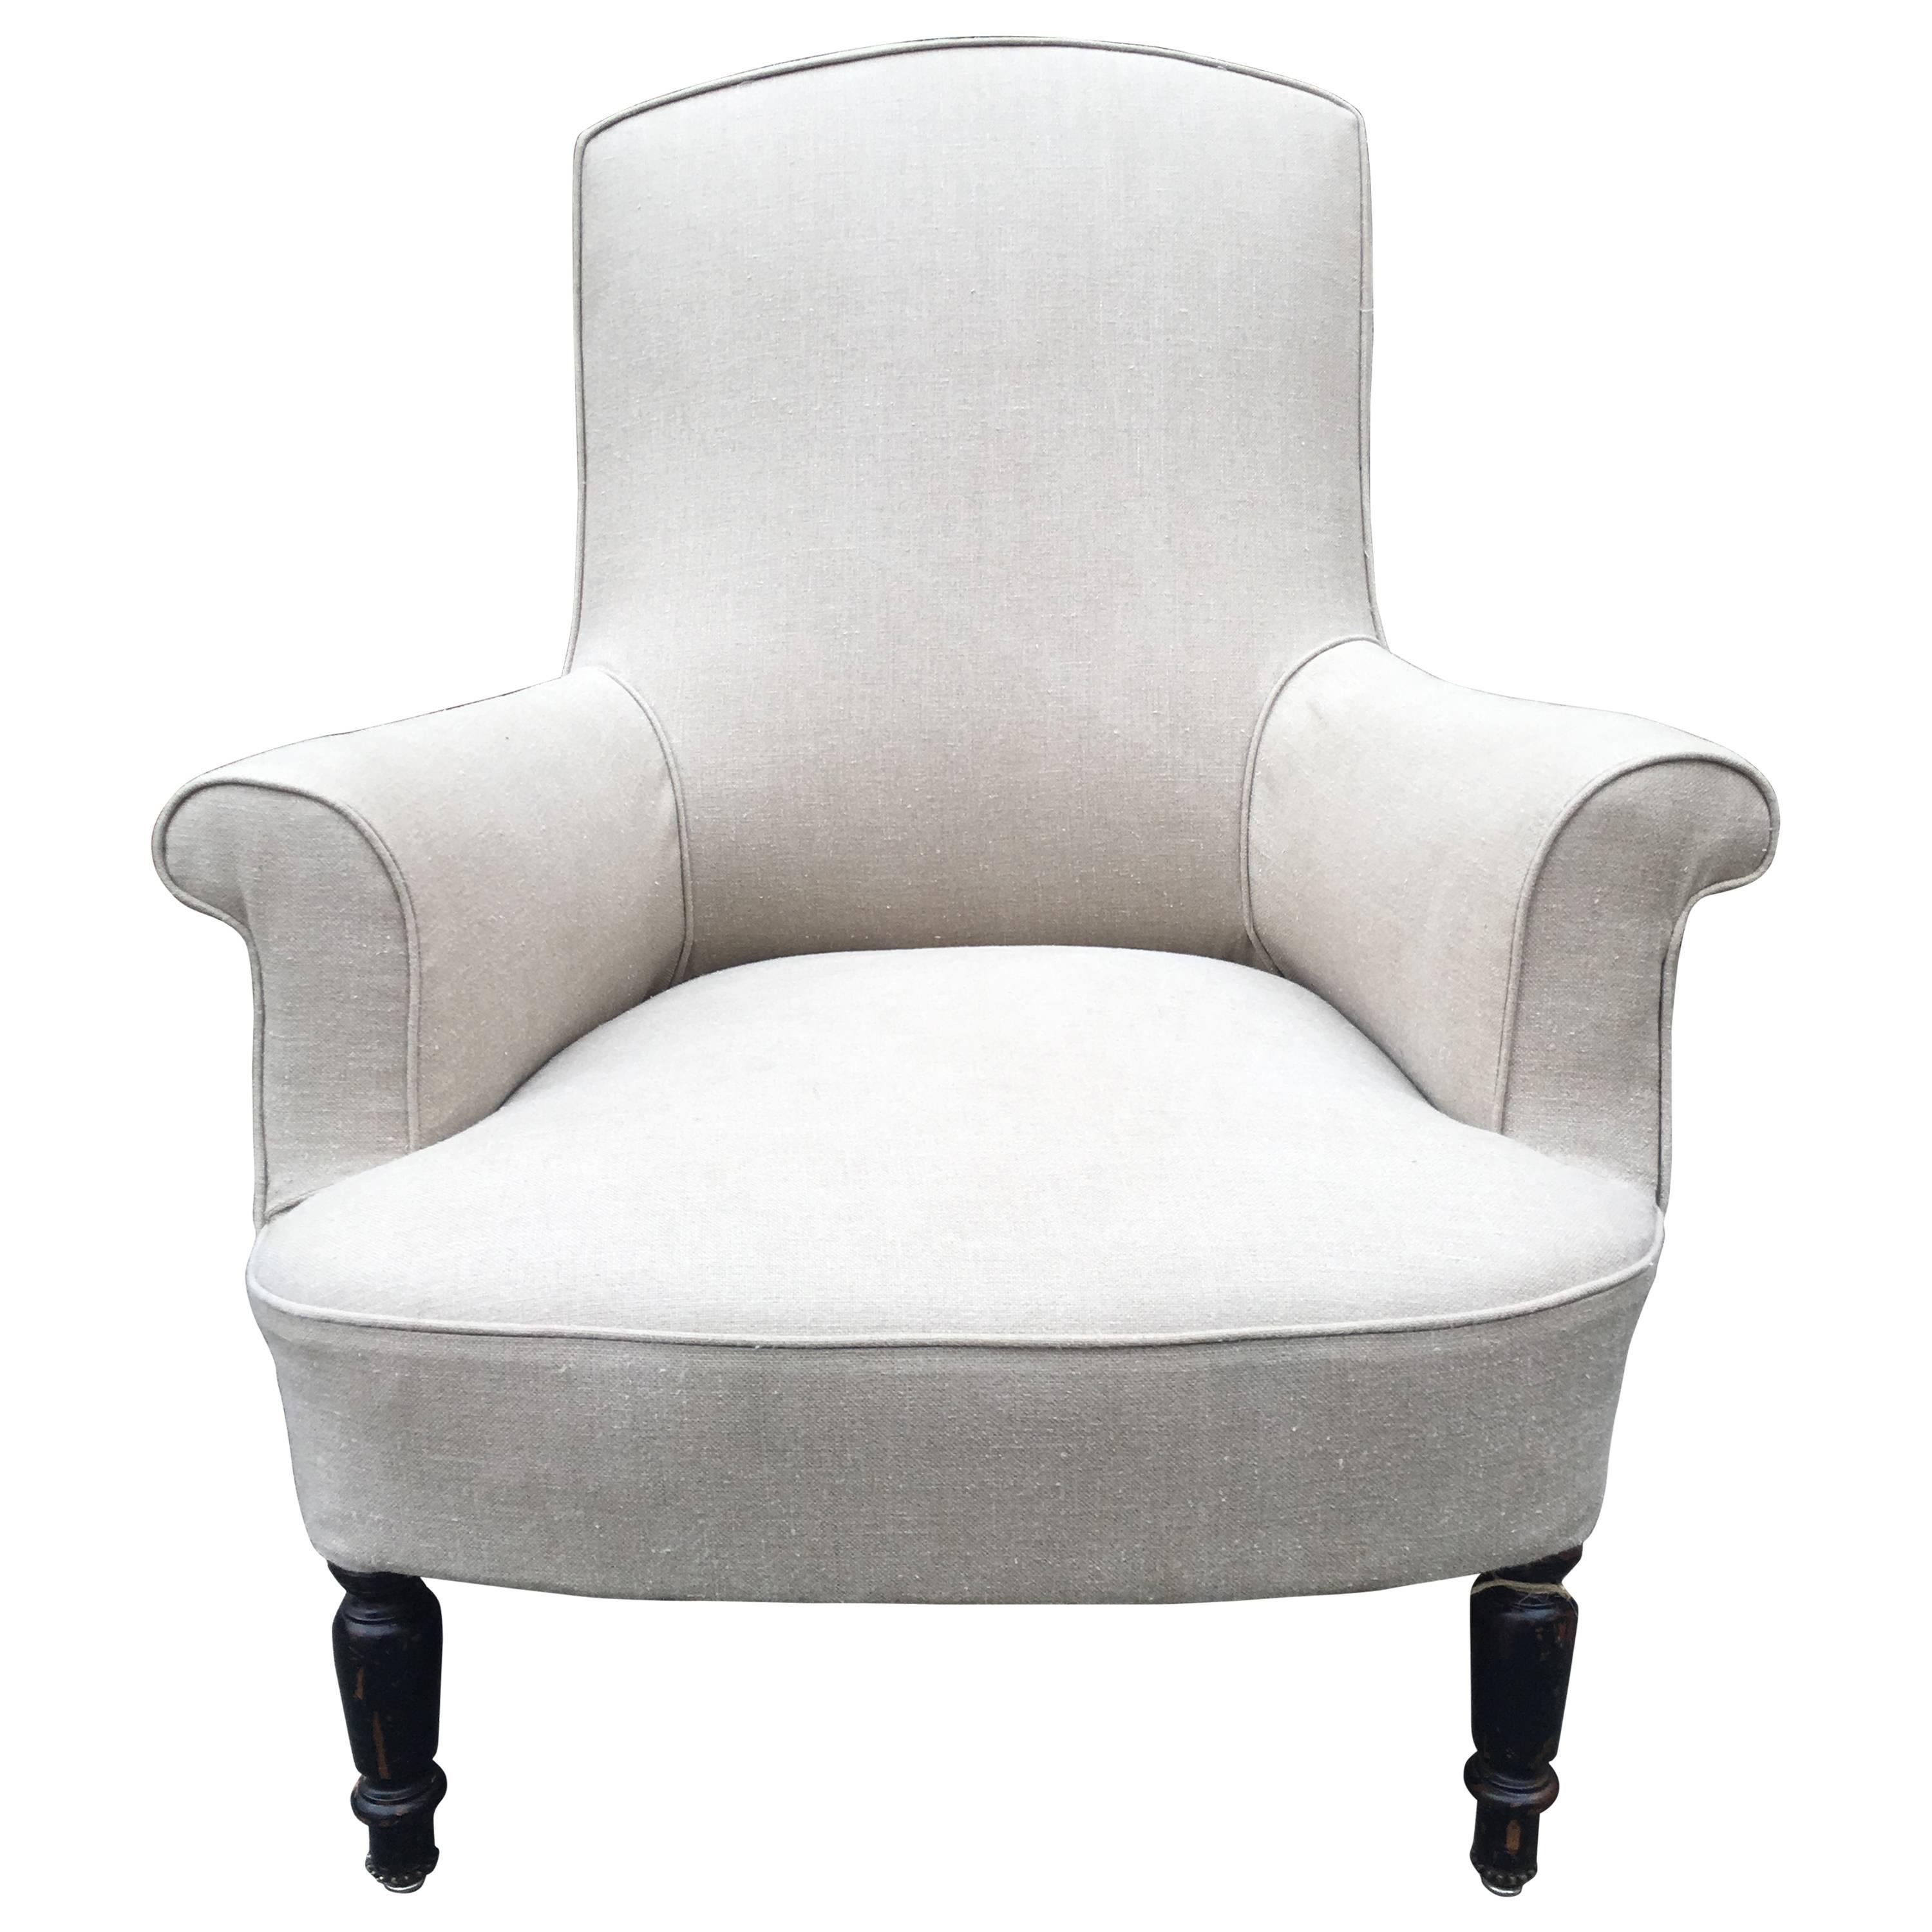 Couple of White Linen Upholstered Armchair For Sale